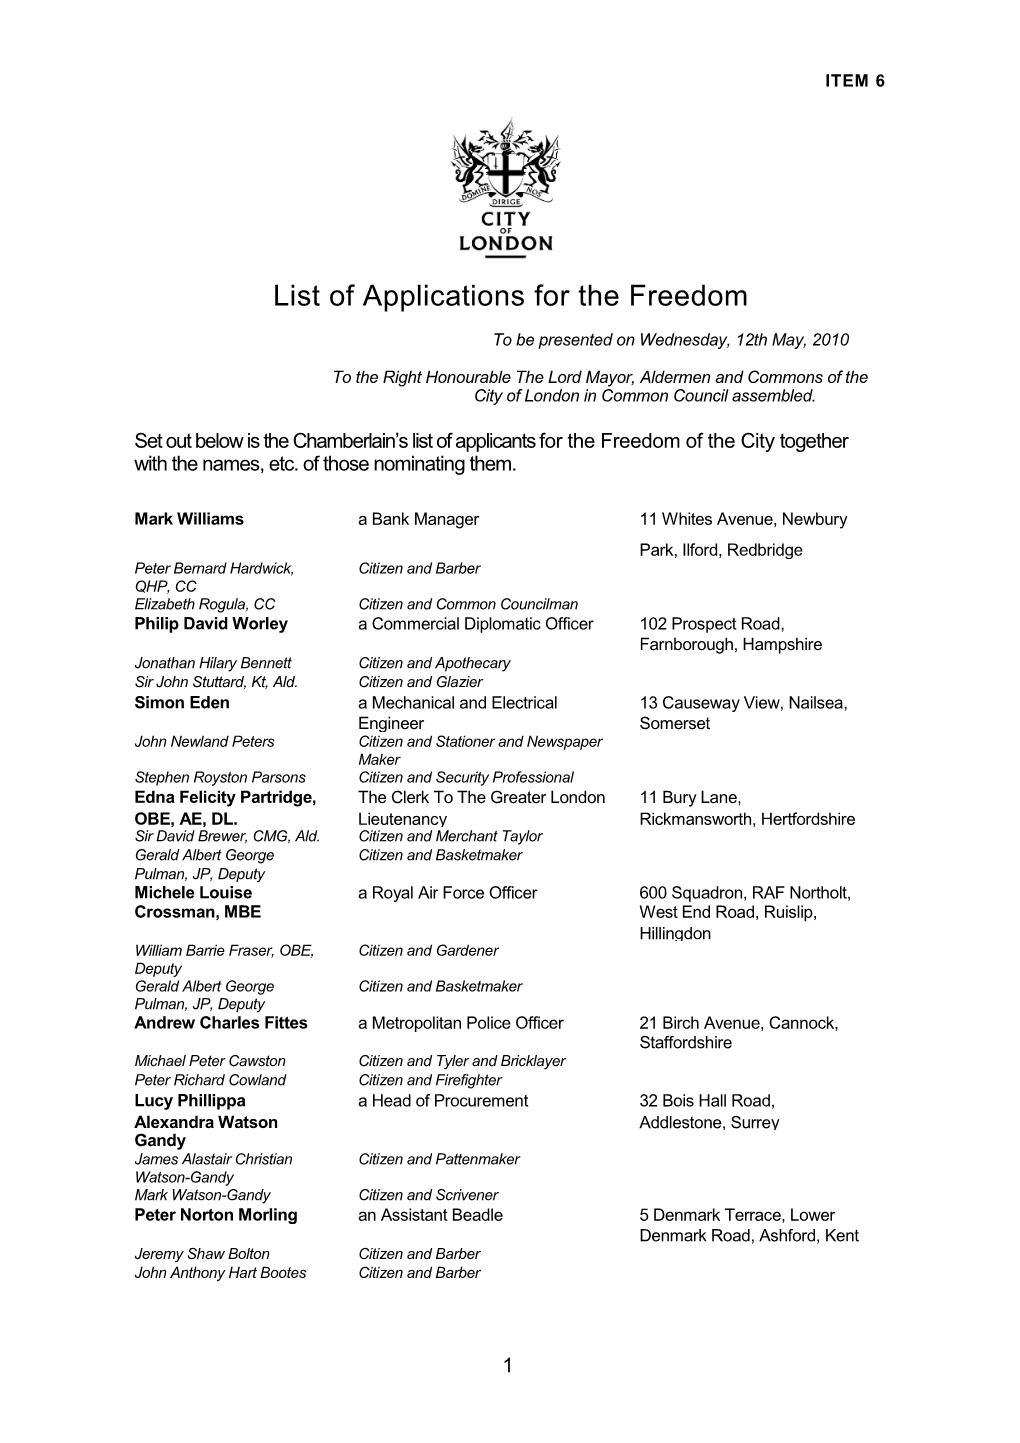 List of Applications for the Freedom